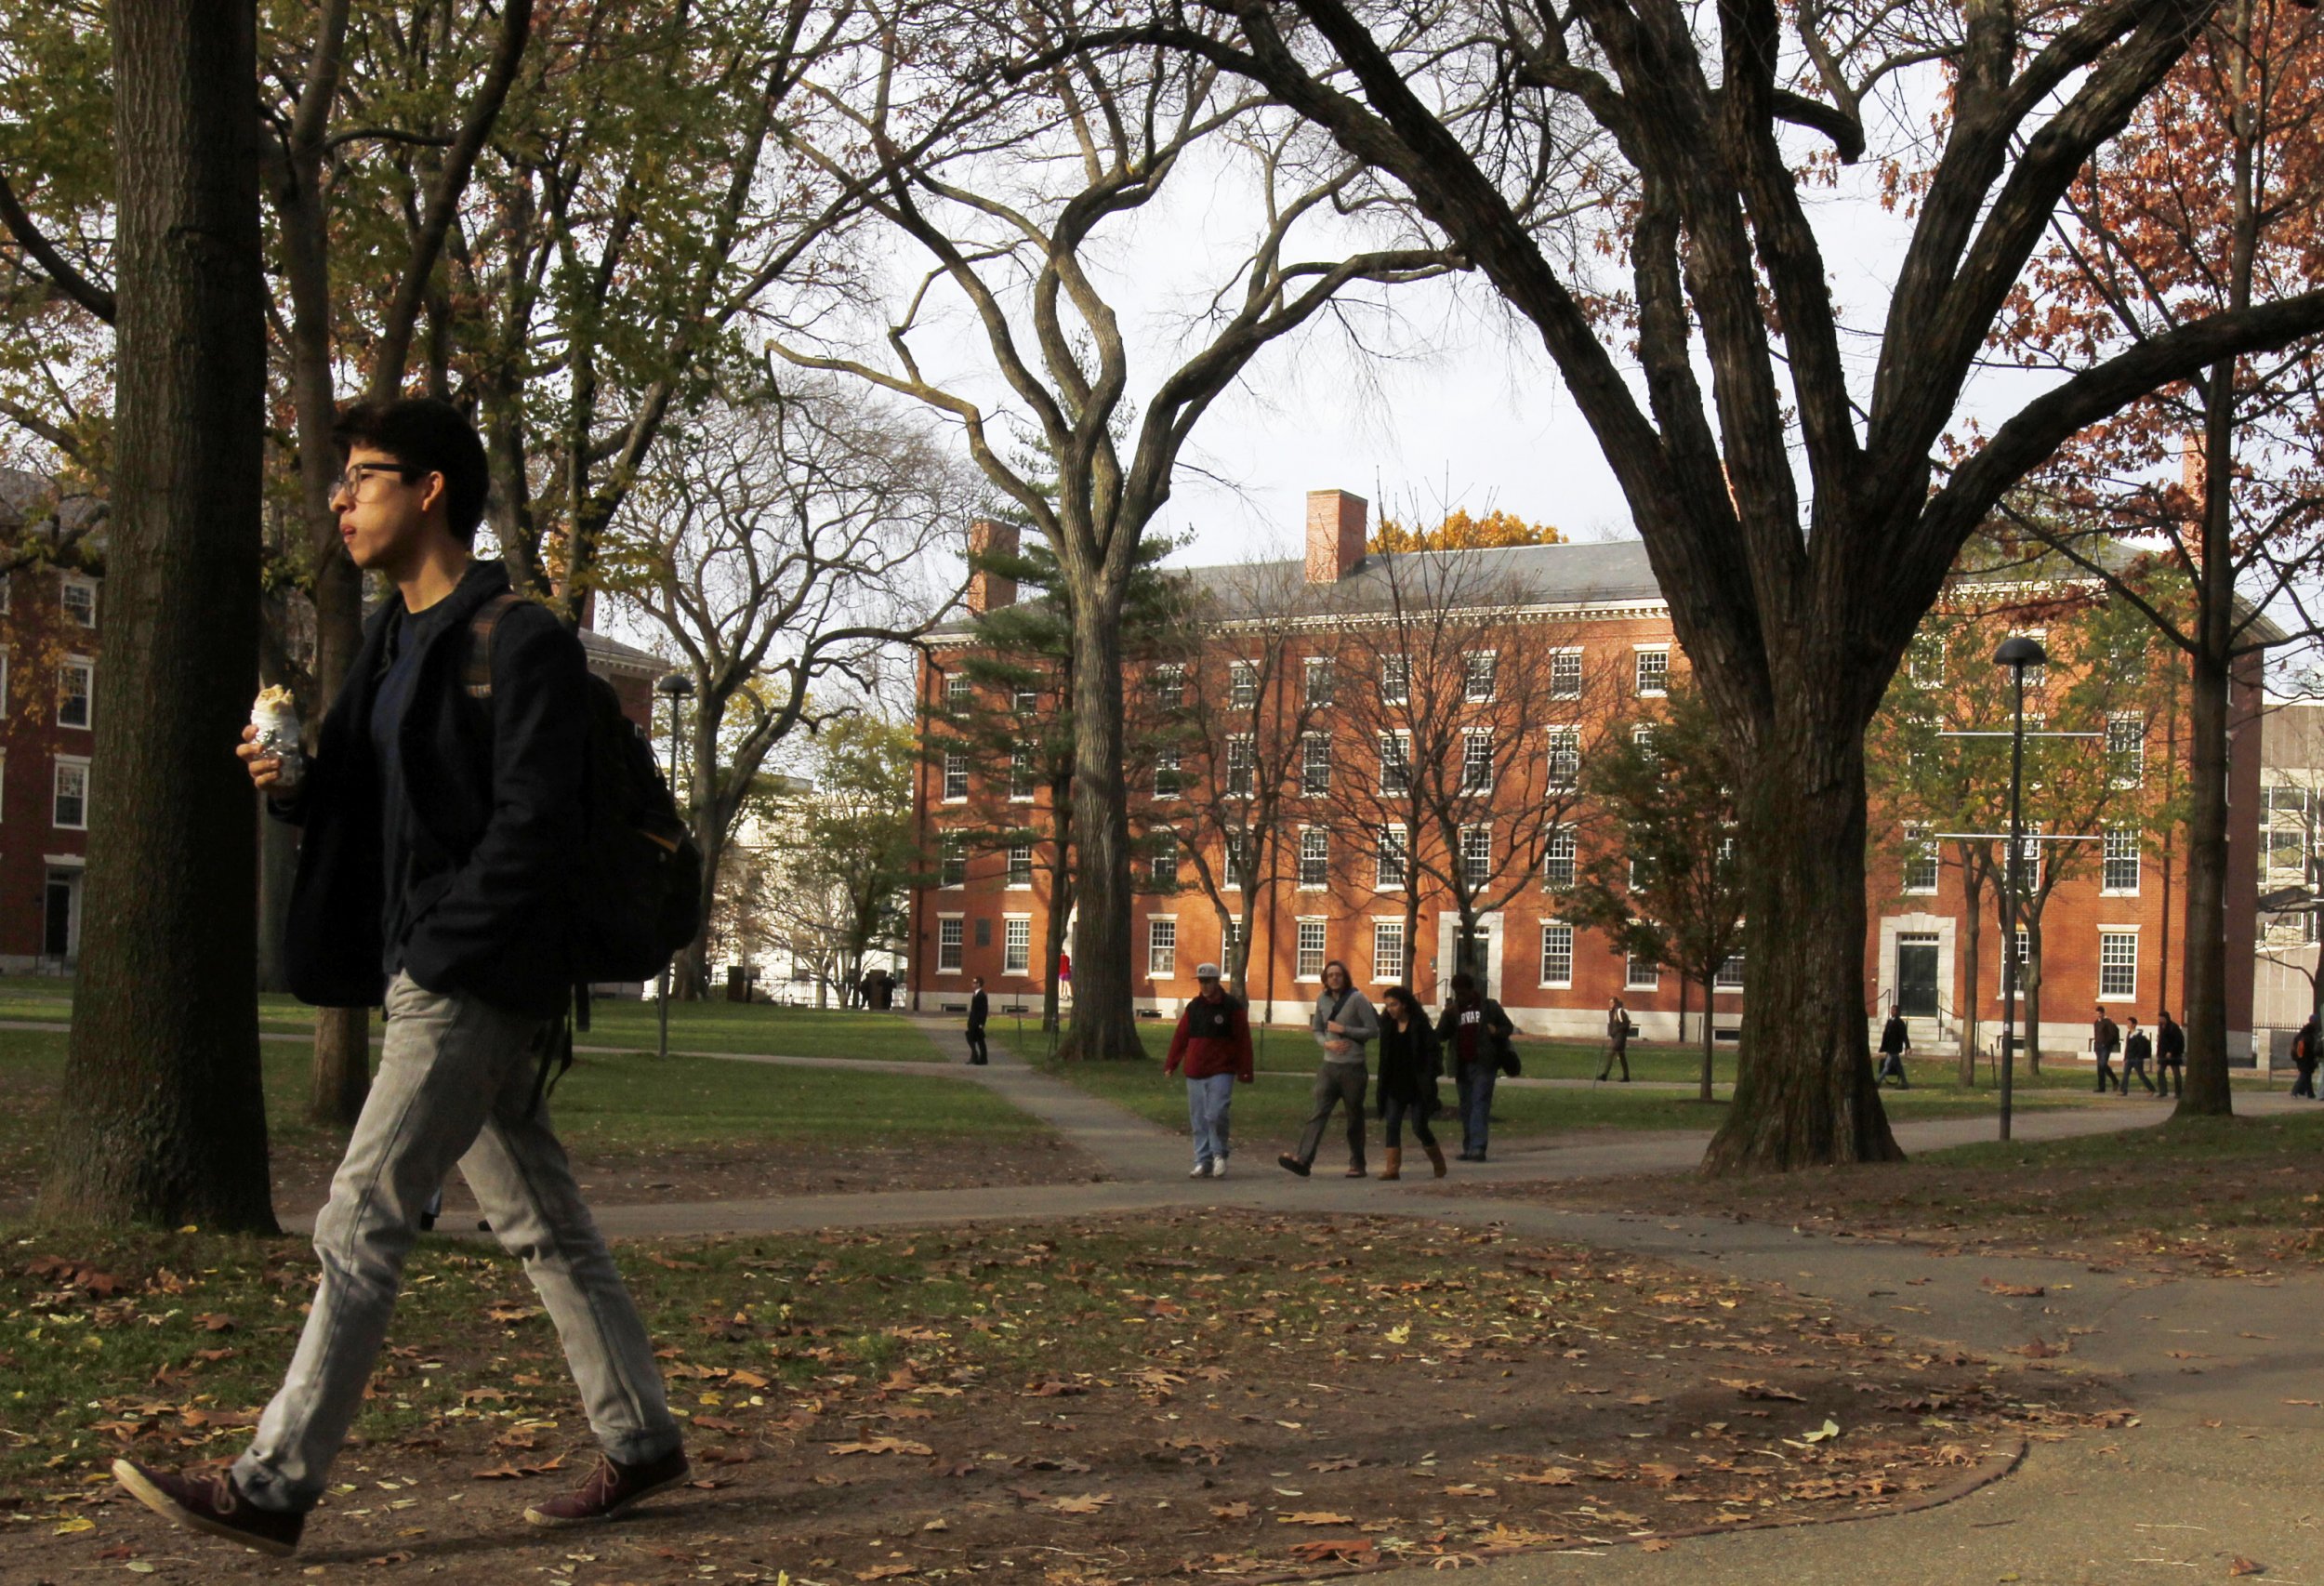 Harvard University, which recently amended its sexual assault policies after heavy criticism in spring.